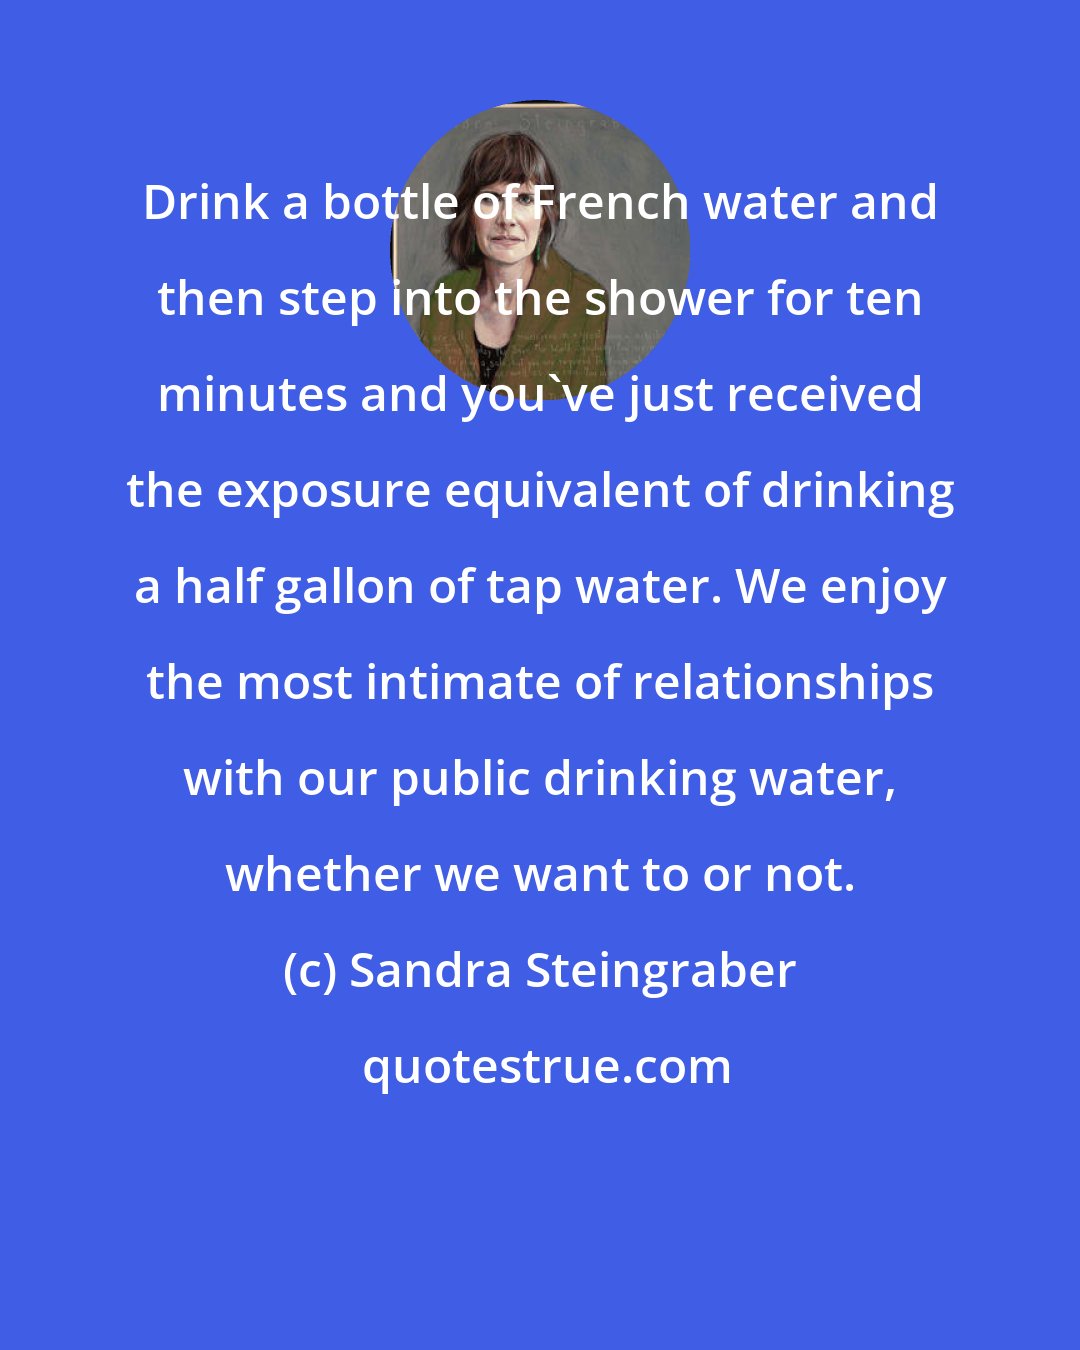 Sandra Steingraber: Drink a bottle of French water and then step into the shower for ten minutes and you've just received the exposure equivalent of drinking a half gallon of tap water. We enjoy the most intimate of relationships with our public drinking water, whether we want to or not.